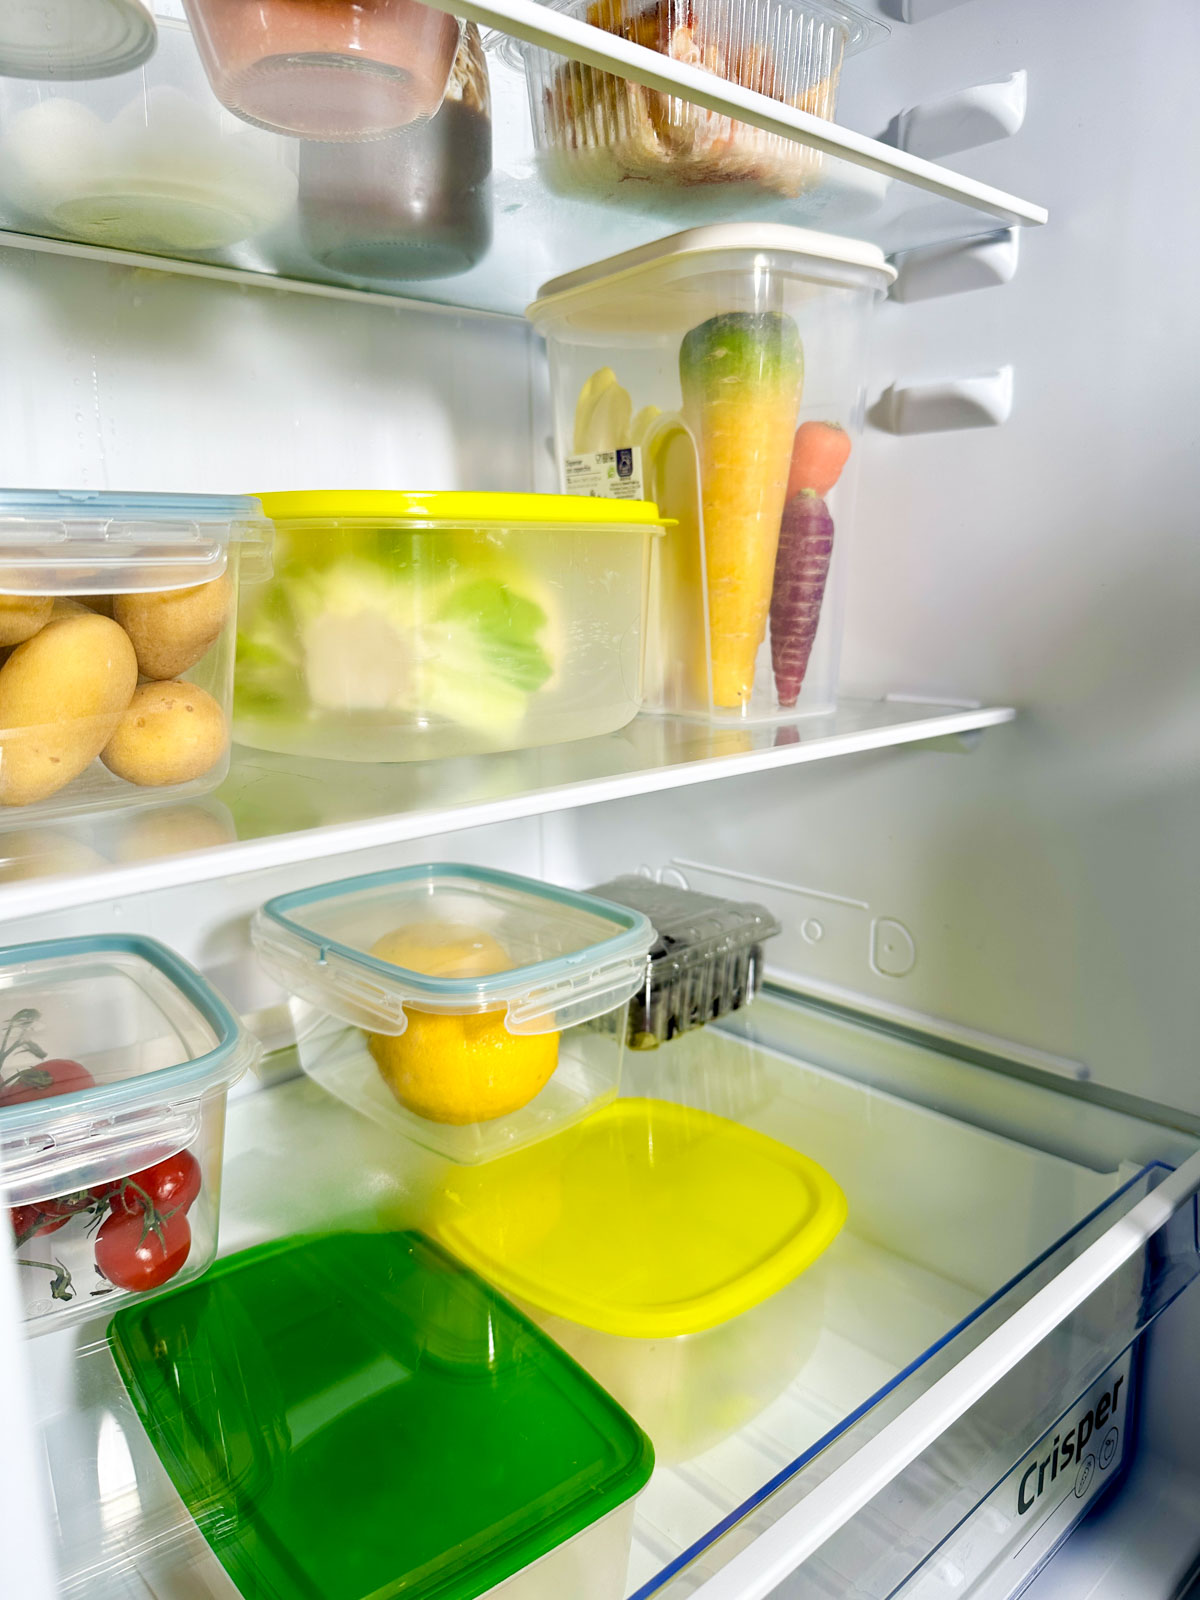 Use Plastic Containers to Organize Food in the Fridge